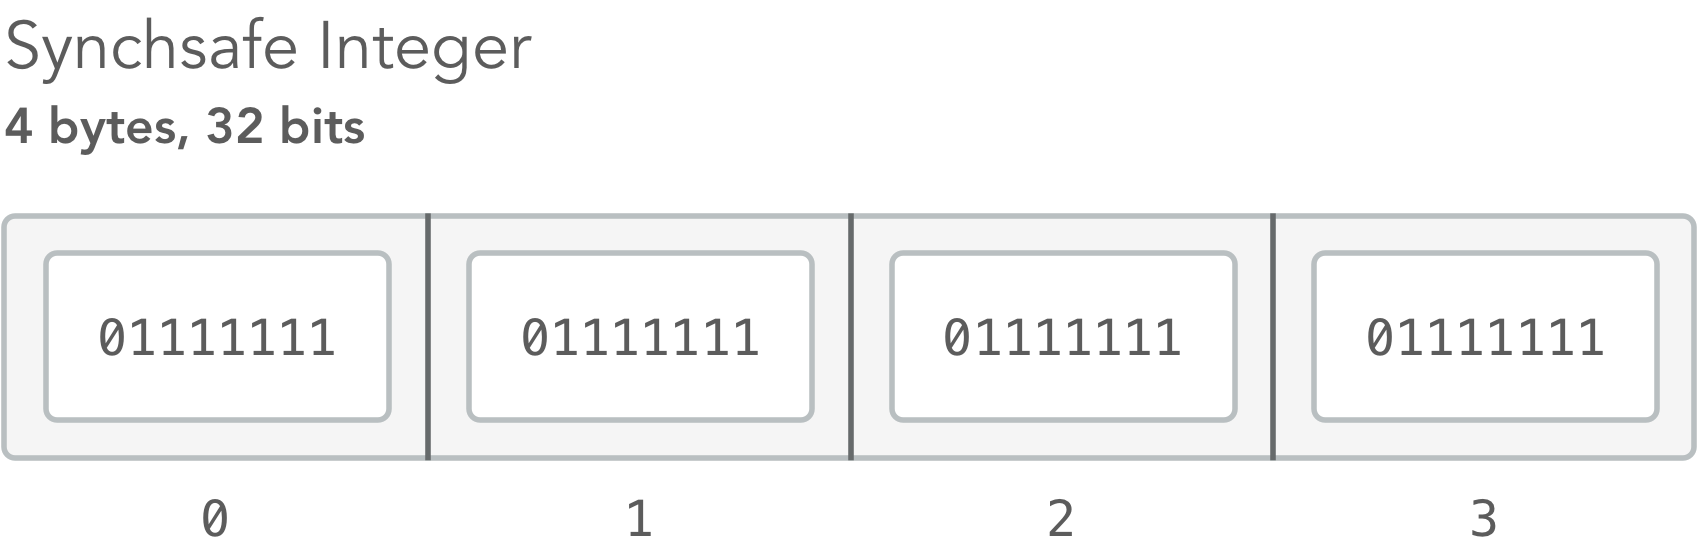 Synchsafe integers